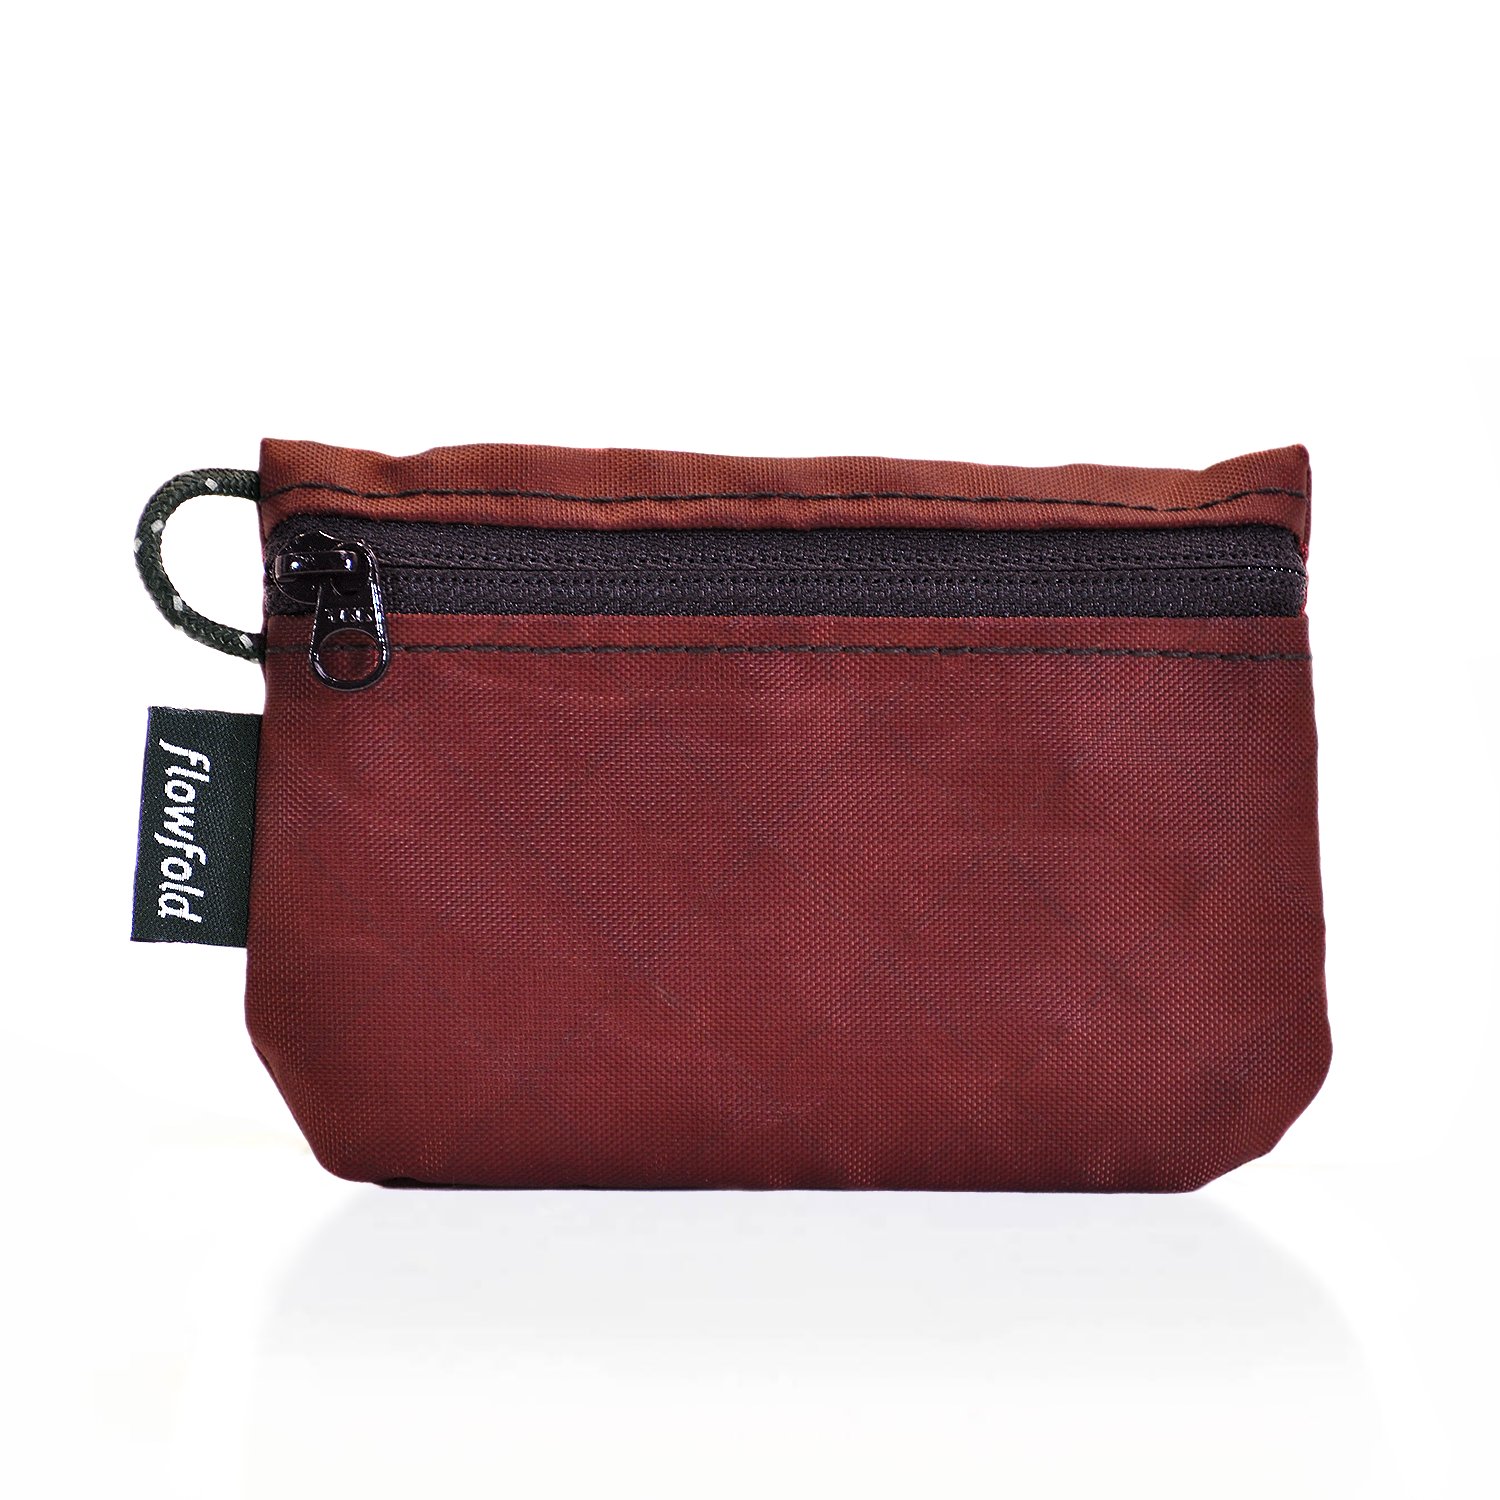 Flowfold Red Barn Essentialist Coin Pouch Wallet For Cash, Cards, and Coins Made in USA, Maine by Flowfold